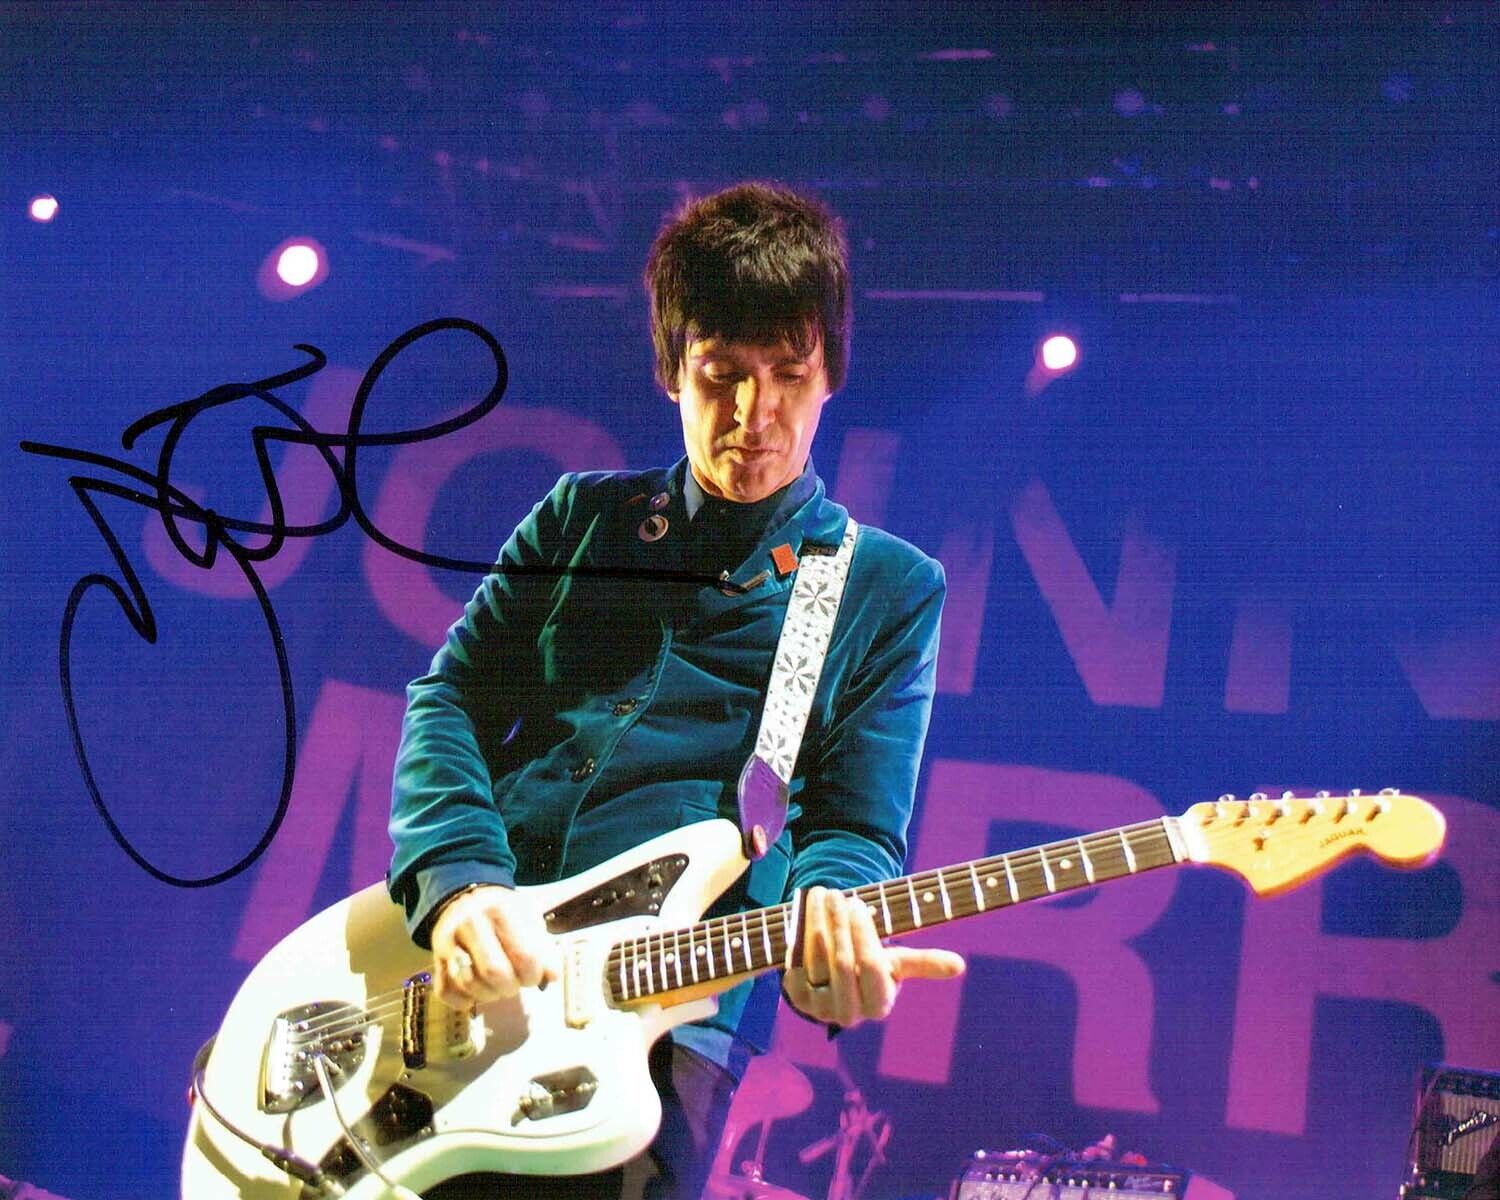 Johnny MARR SIGNED Autograph 10x8 Photo Poster painting 7 AFTAL COA The SMITHS Legend